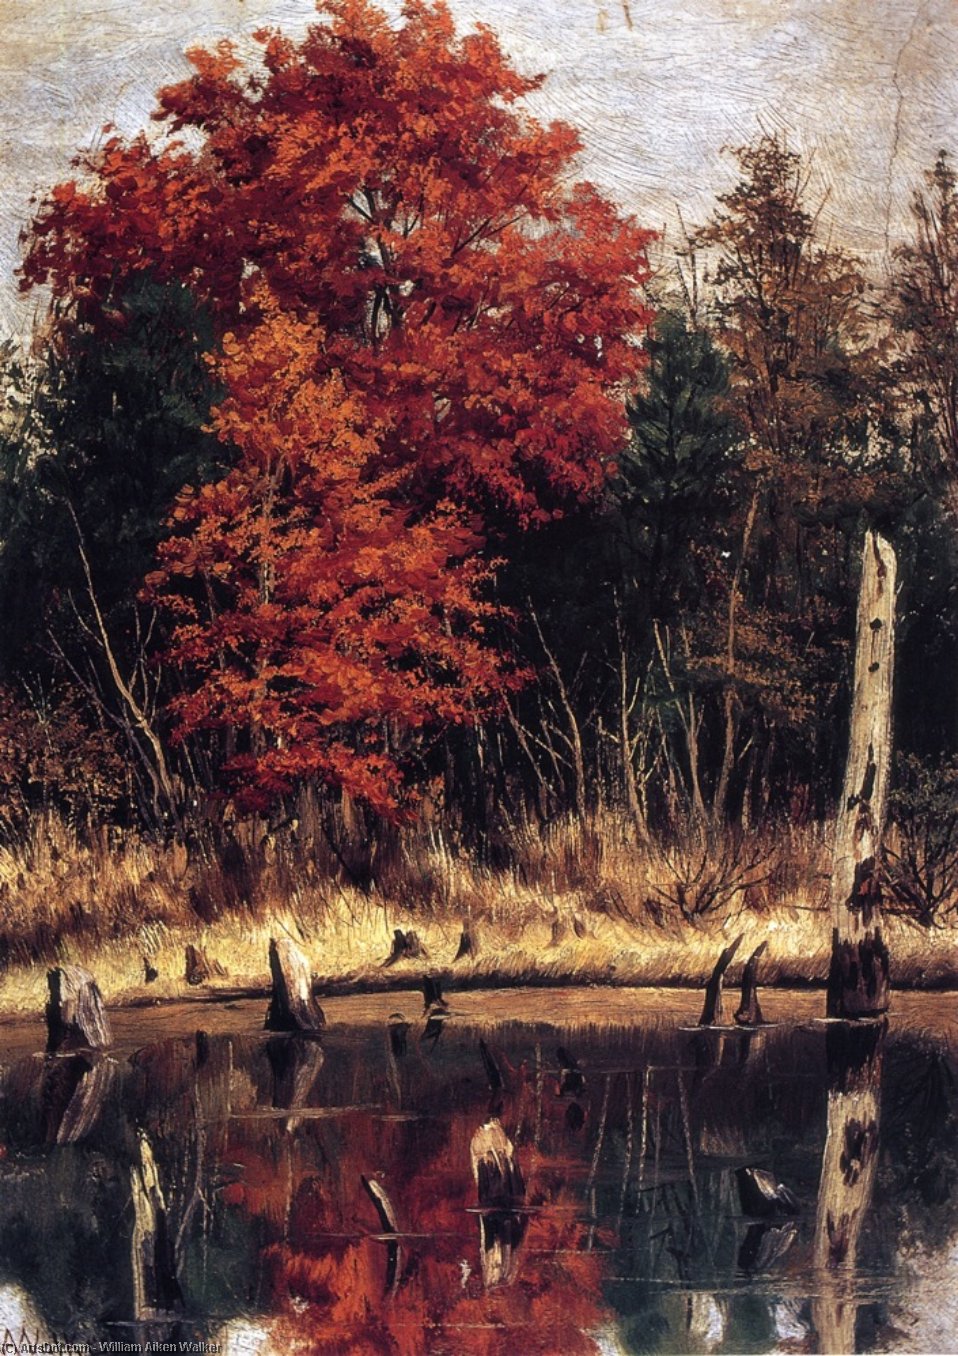 Order Oil Painting Replica Autumn Wood In North Carolina With Tree Stumps In Water by William Aiken Walker (1839-1921, United States) | ArtsDot.com